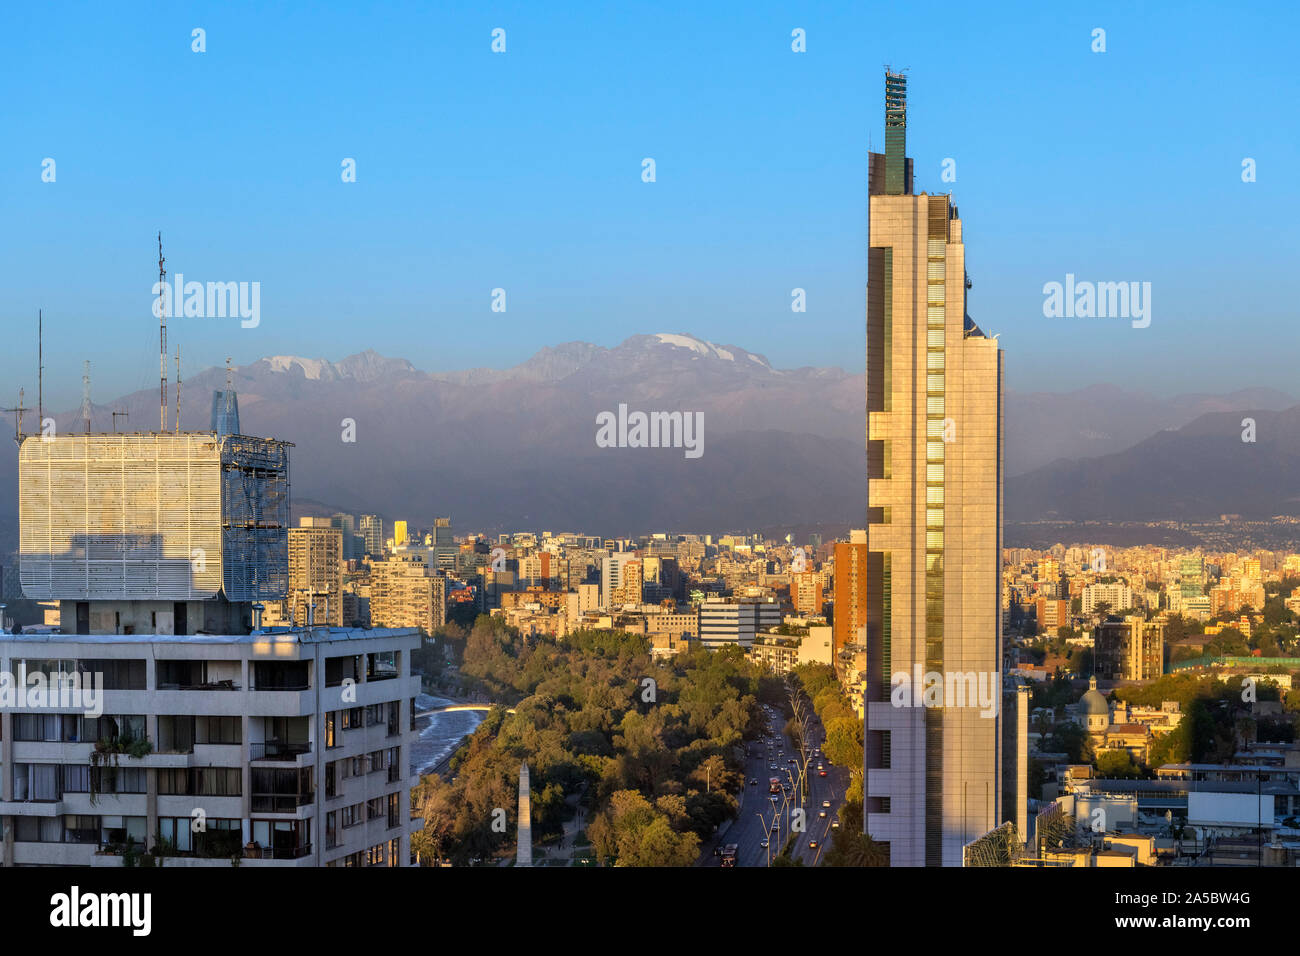 Cityscape viewed from the Crowne Plaza Hotel in the late afternoon with the Andes mountain range behind, Santiago, Chile, South America Stock Photo